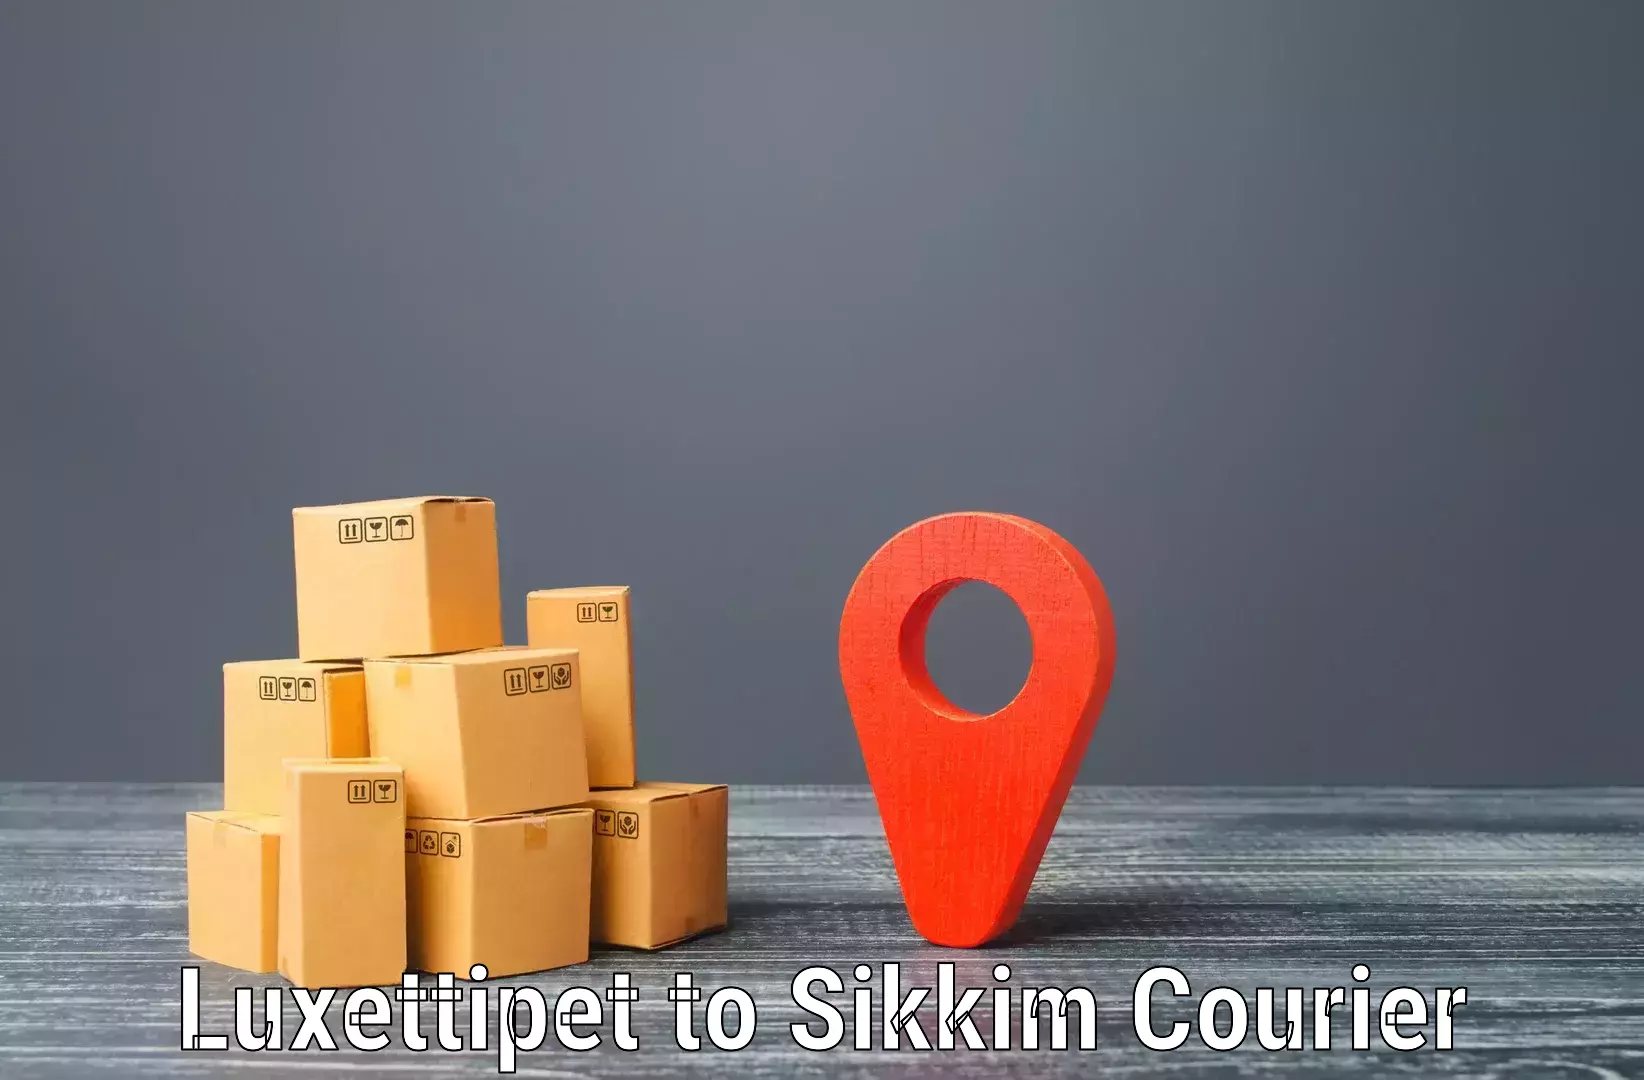 Global shipping networks in Luxettipet to Sikkim